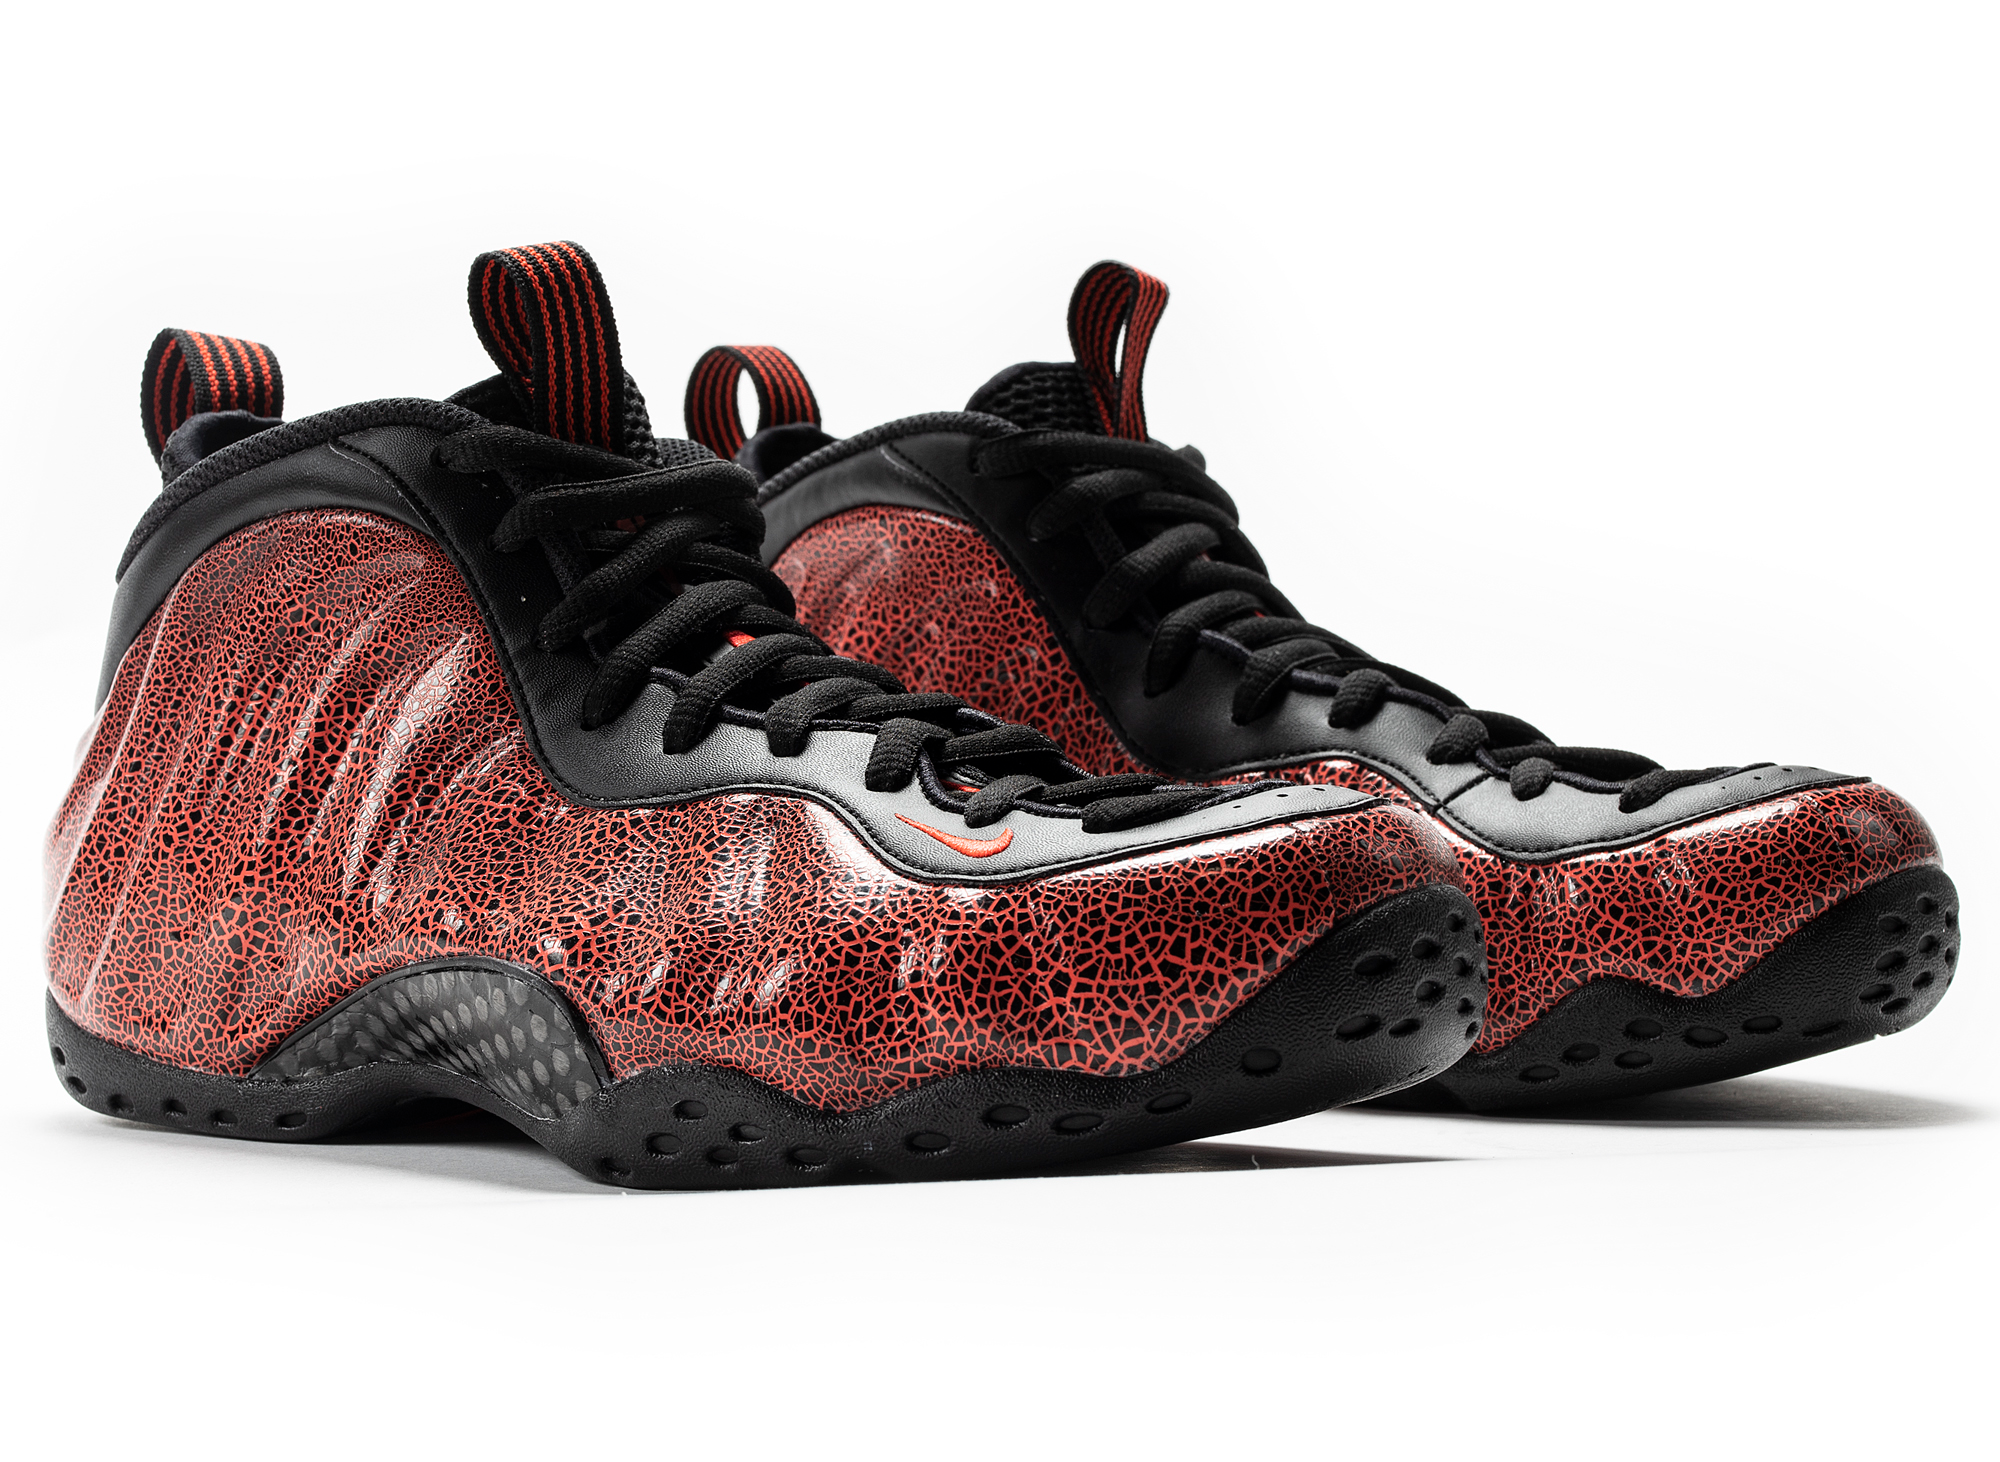 Weatherman Air Foamposite One.Sole Collector